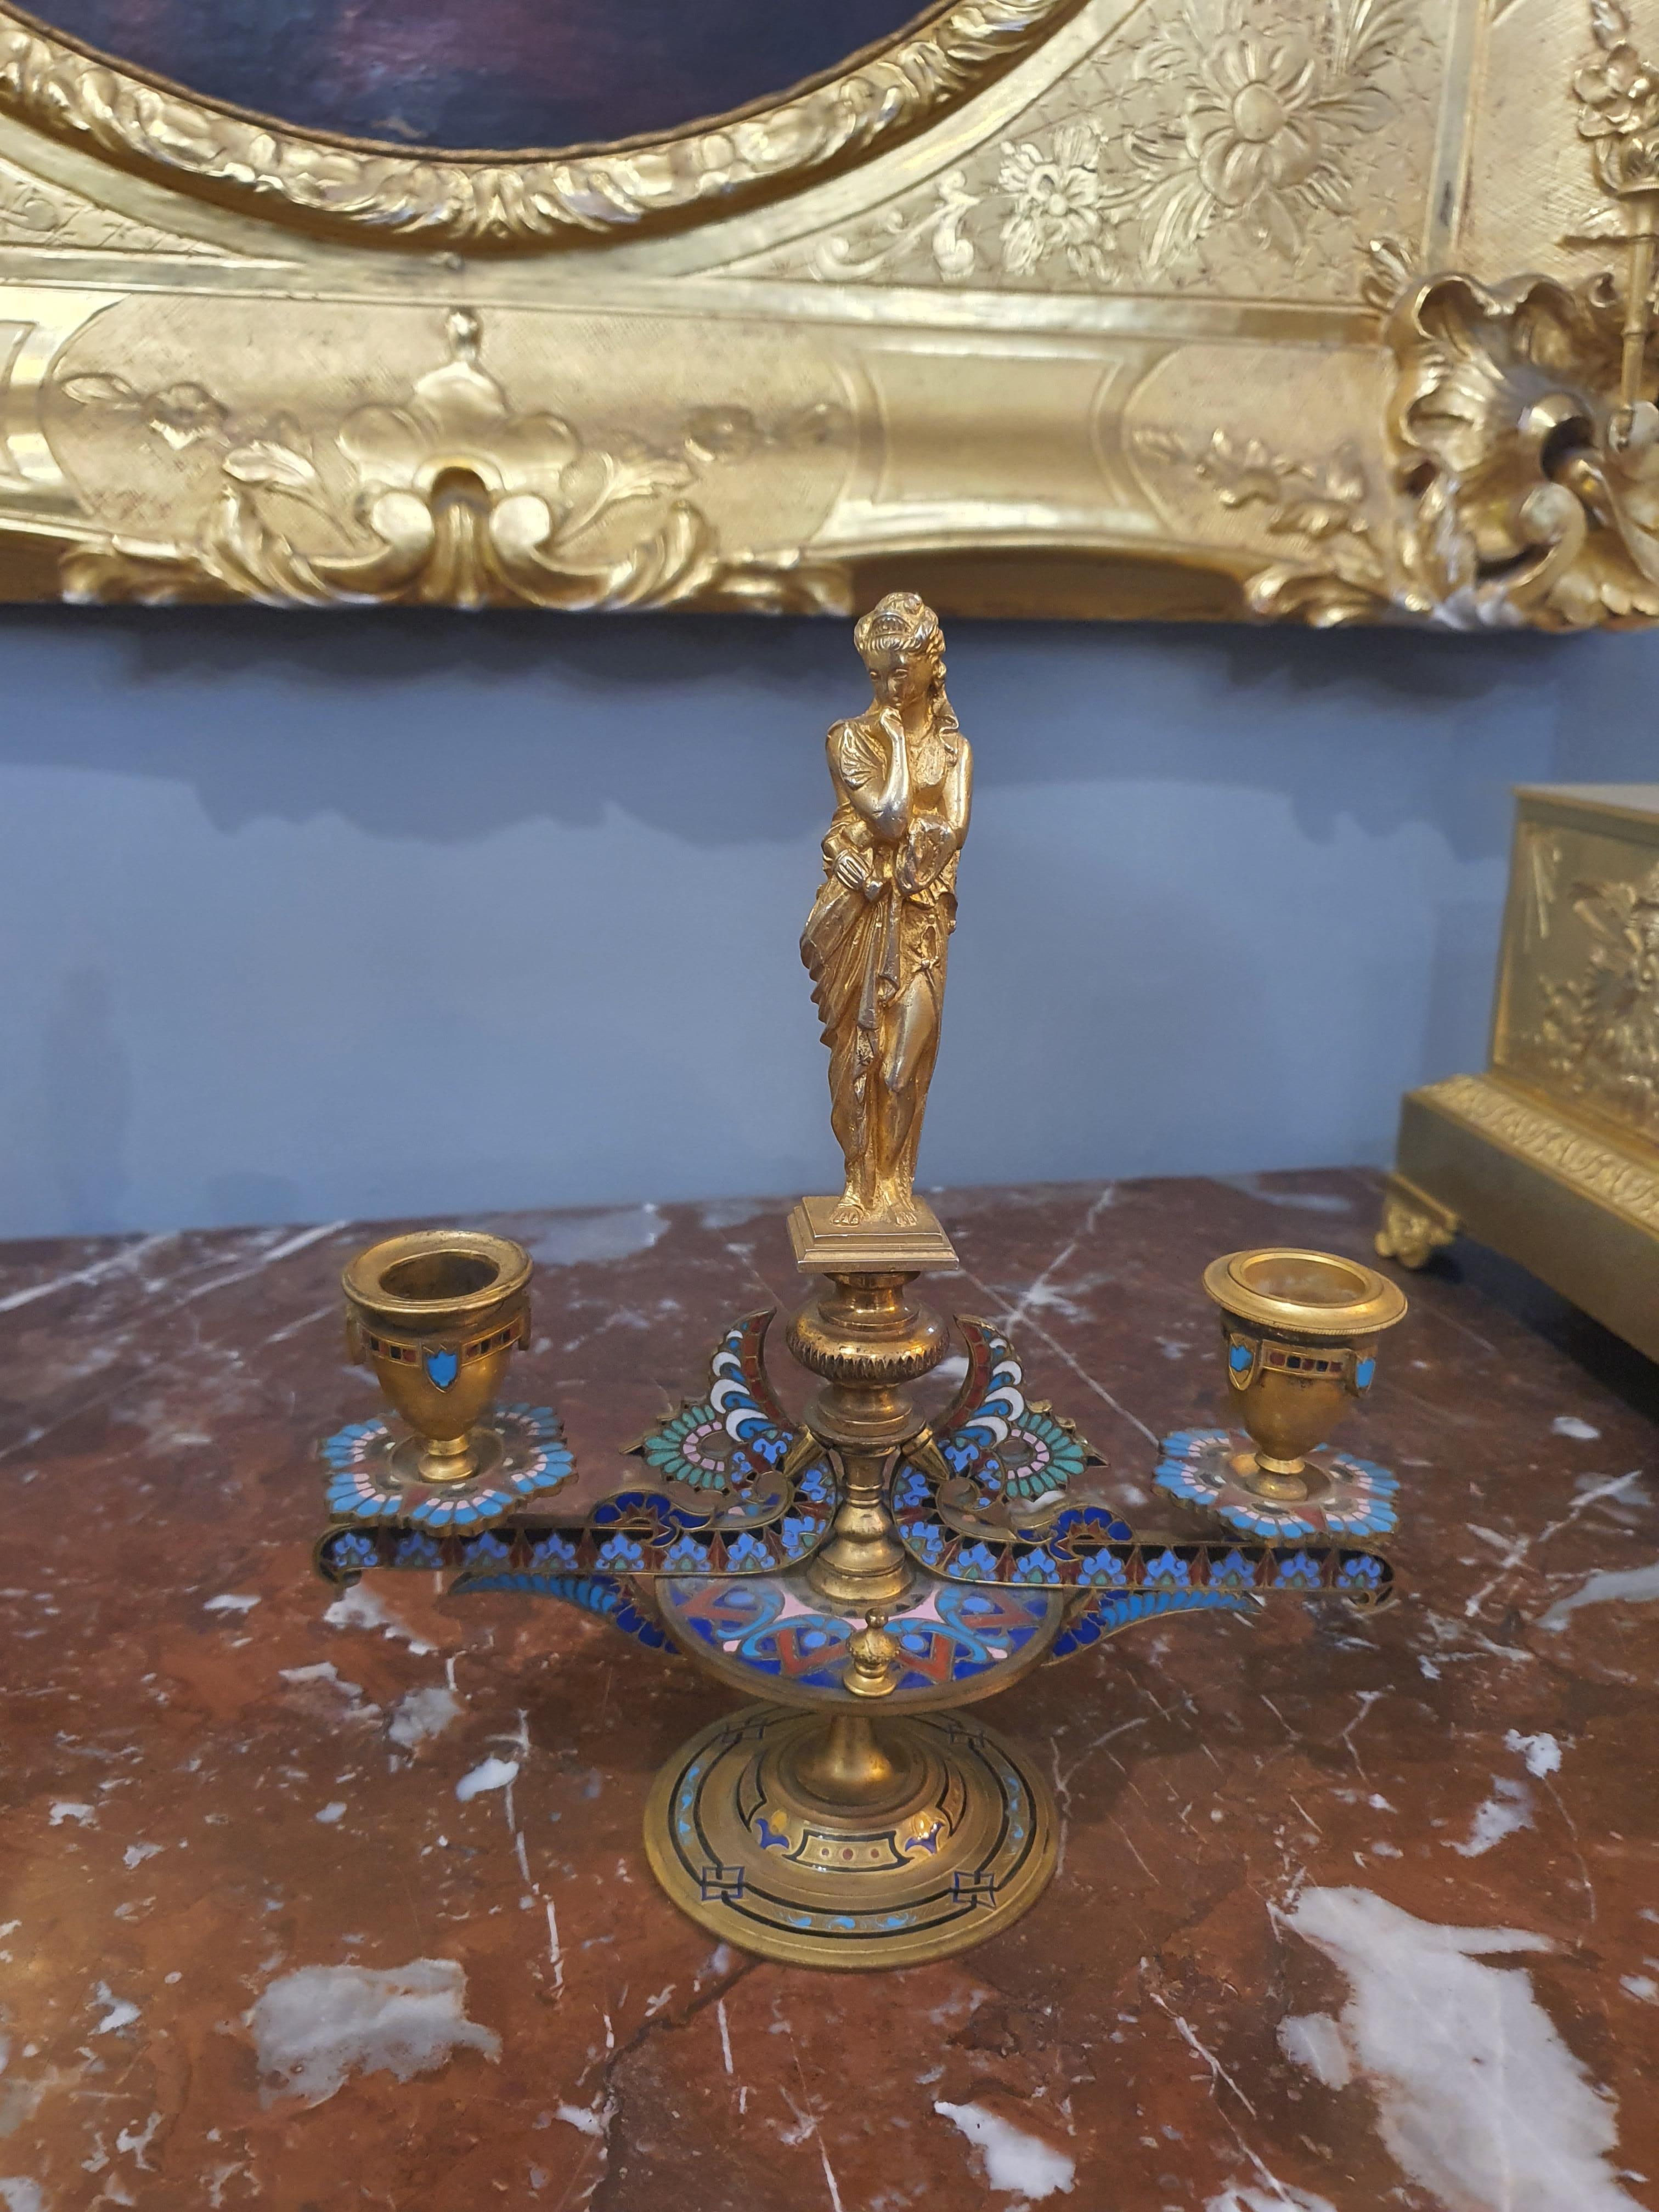 Elegant pair of finely chiseled and gilded bronze candelabra with cloisonné enamels.
Cloisonné, also called Byzantium luster, is an artistic enamel decoration technique.